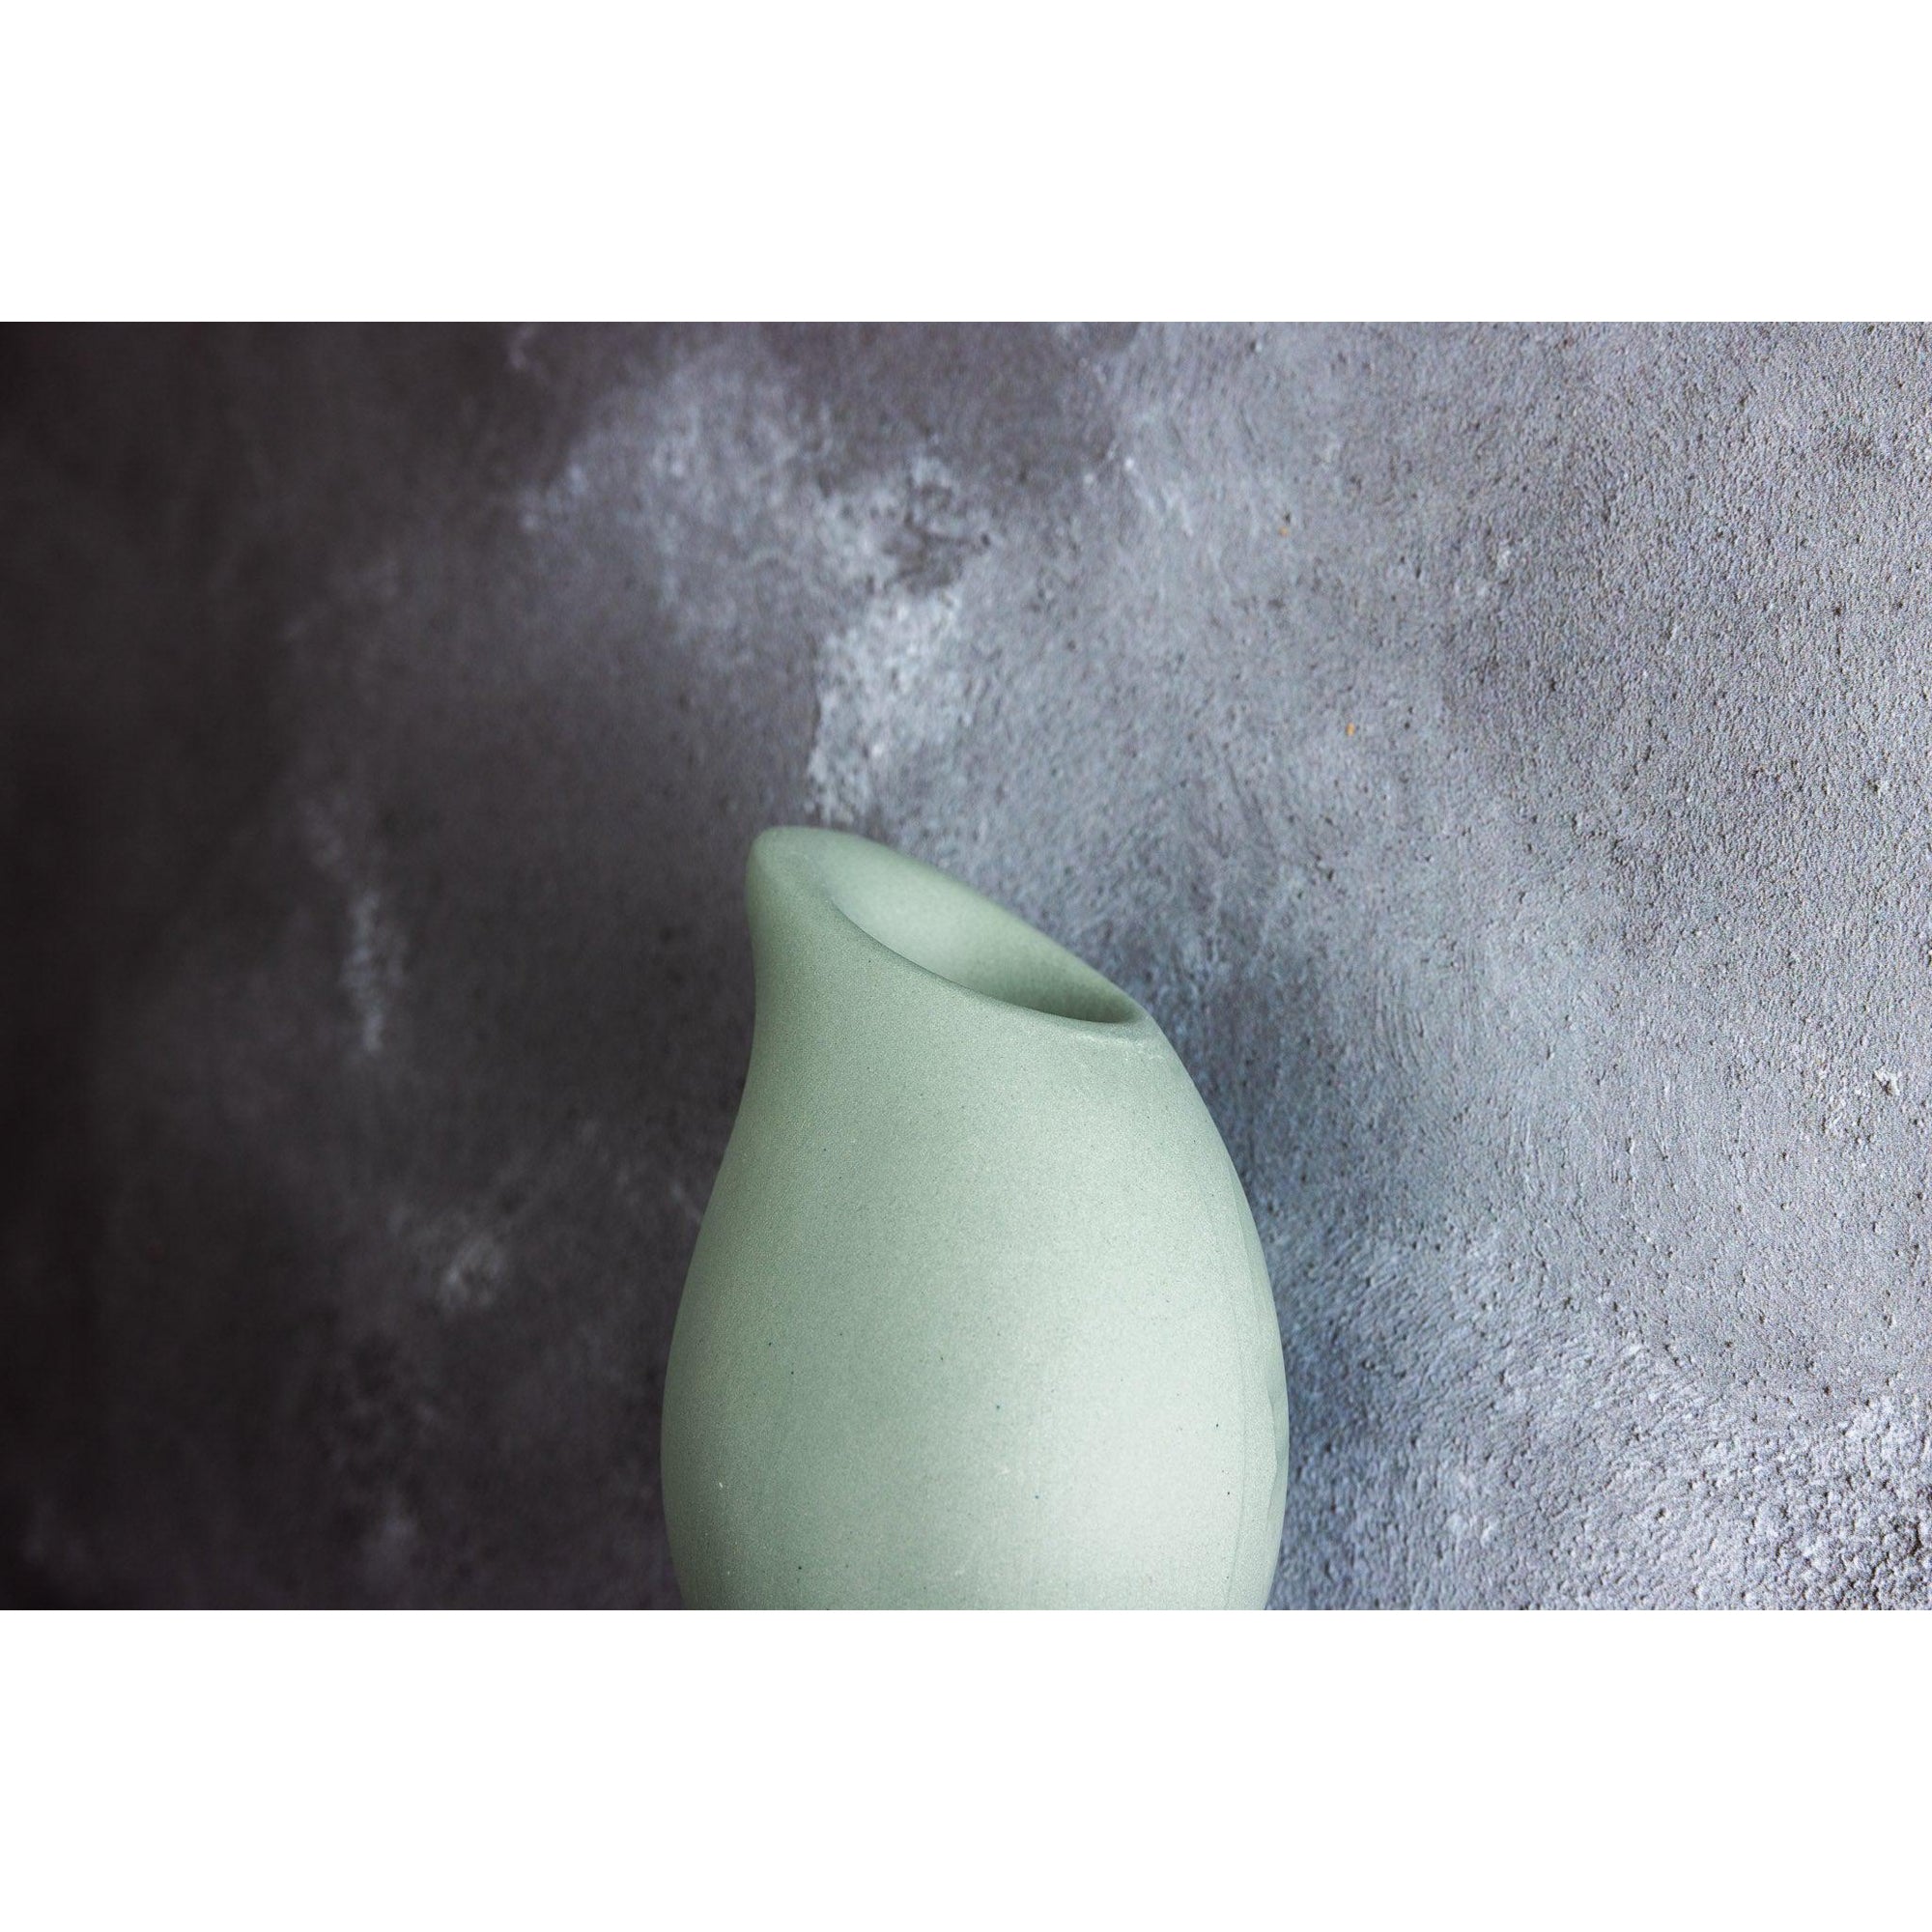 KSP3 Droplet Wall Vase by Kate Schuricht, available at Padstow Gallery, Cornwall